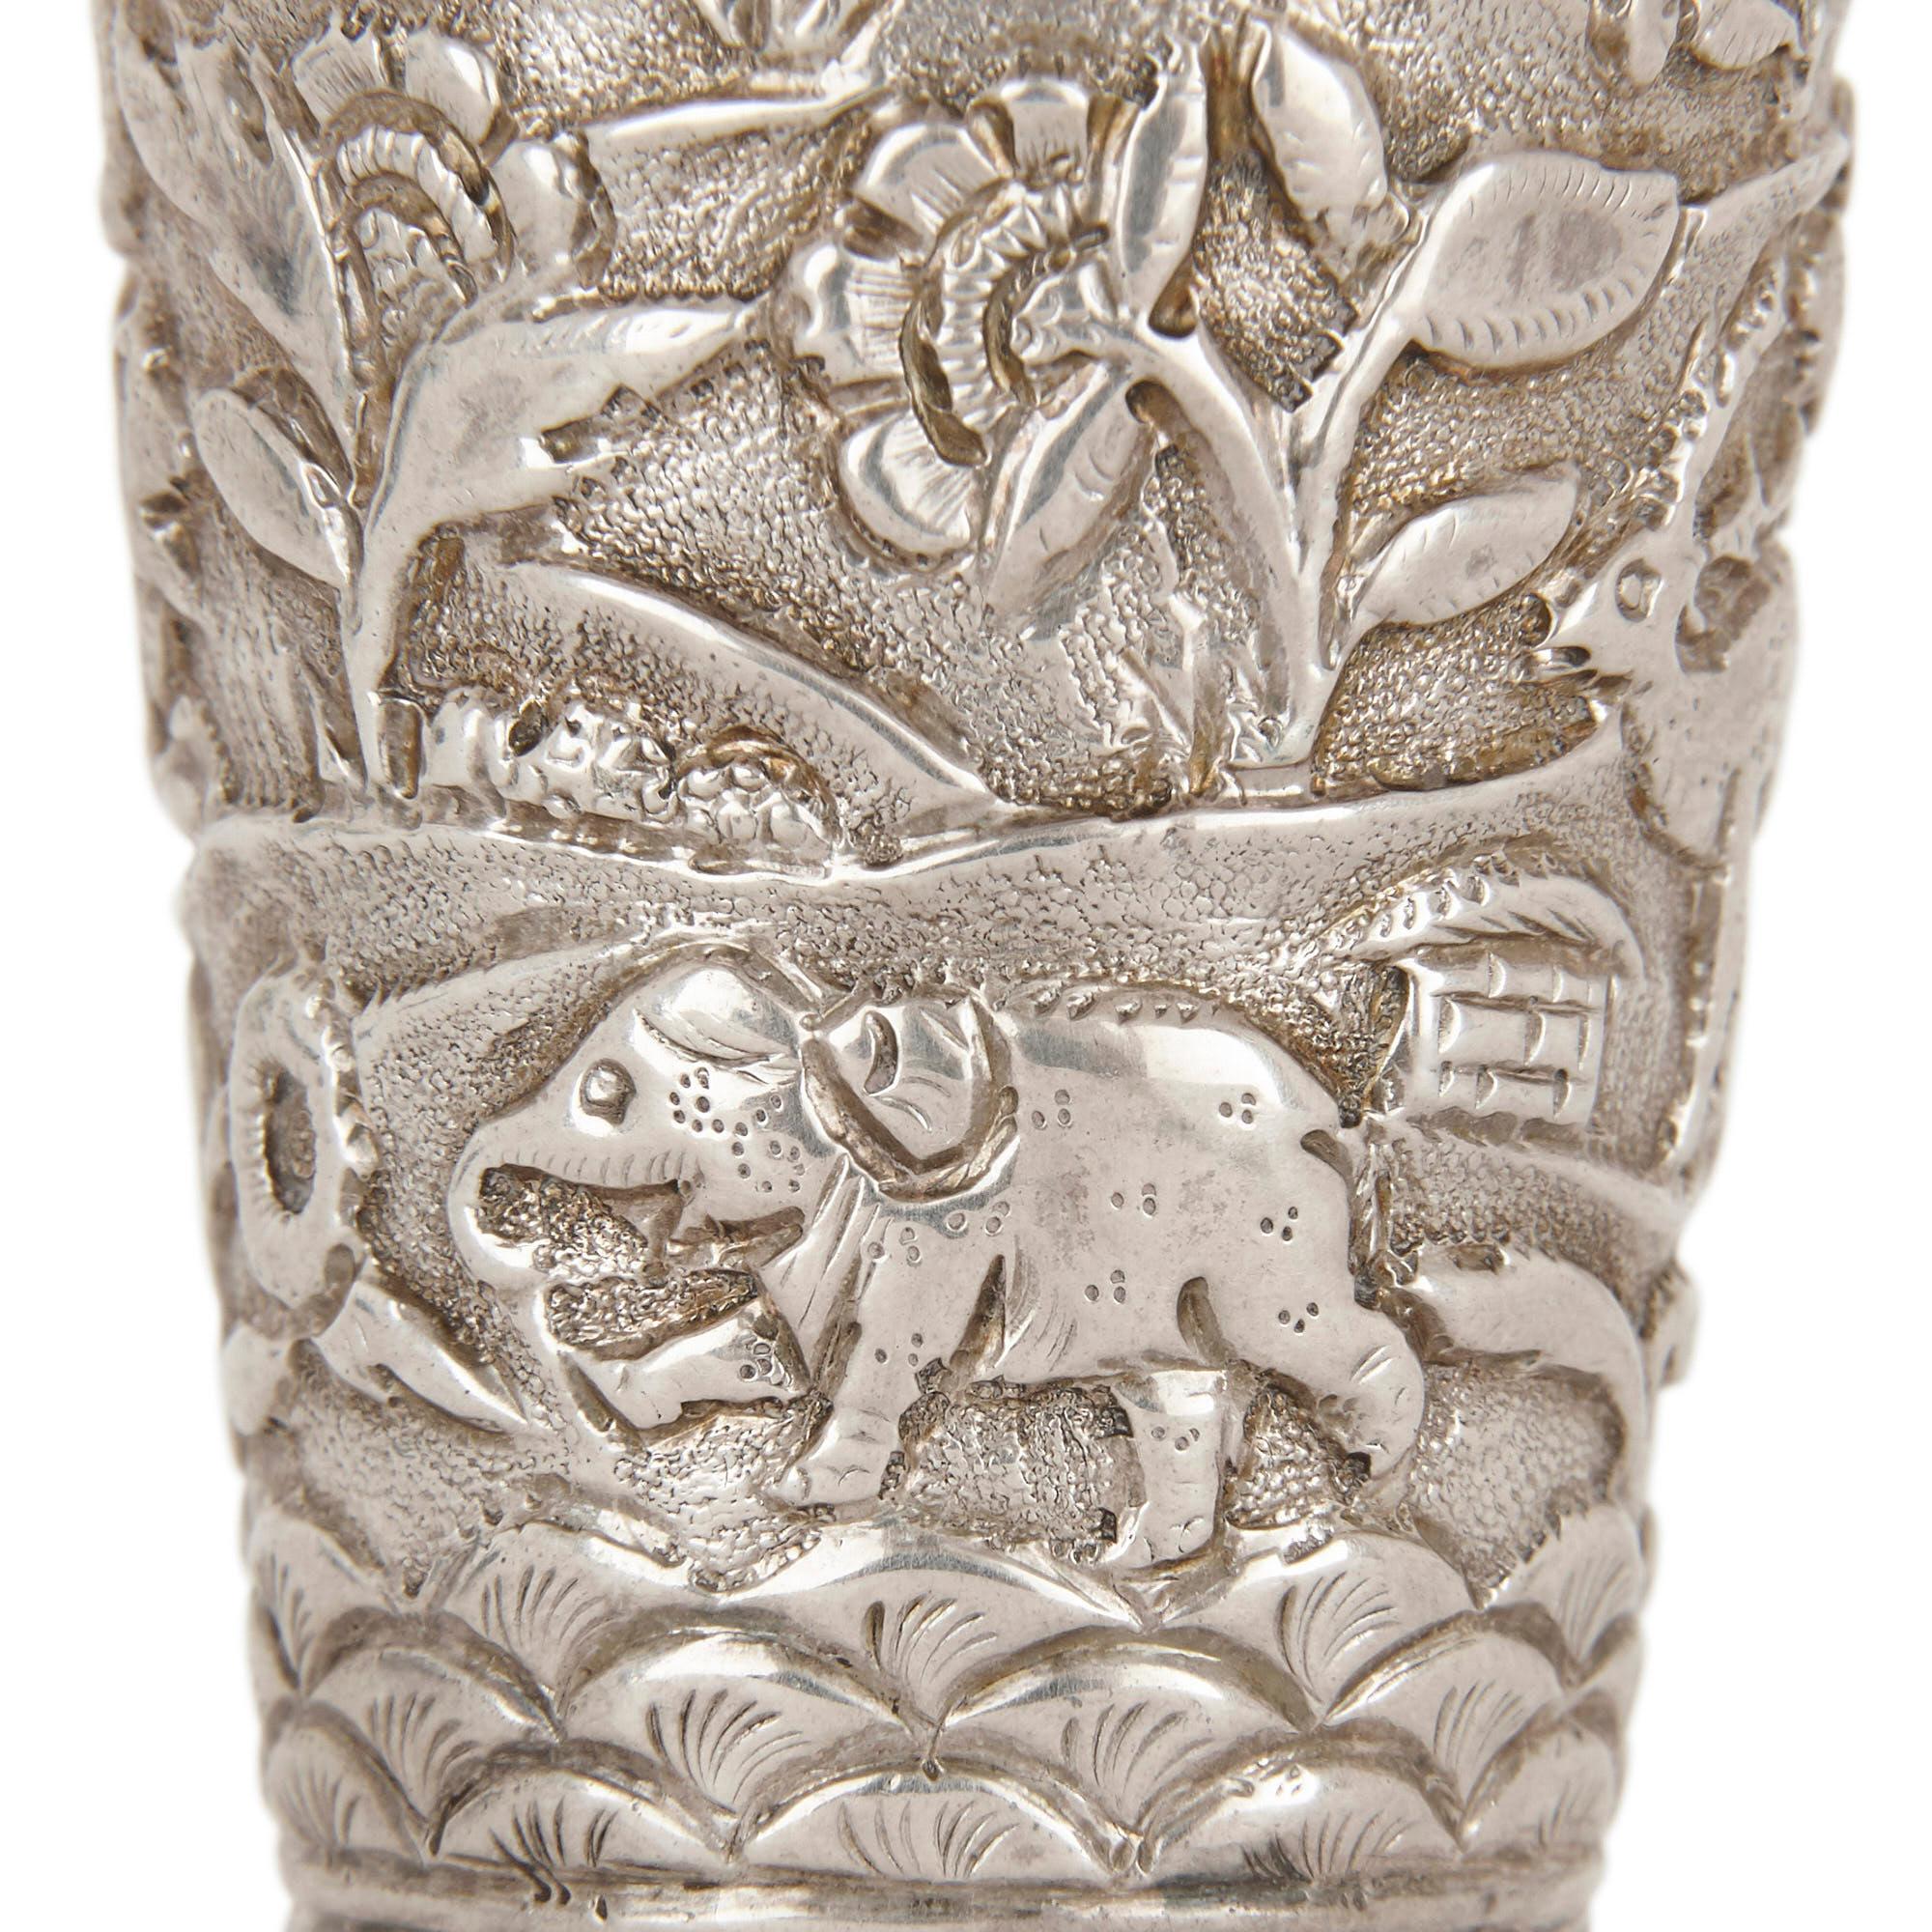 Indian Silver Cup with Jewels and Animals Decoration In Good Condition For Sale In London, GB